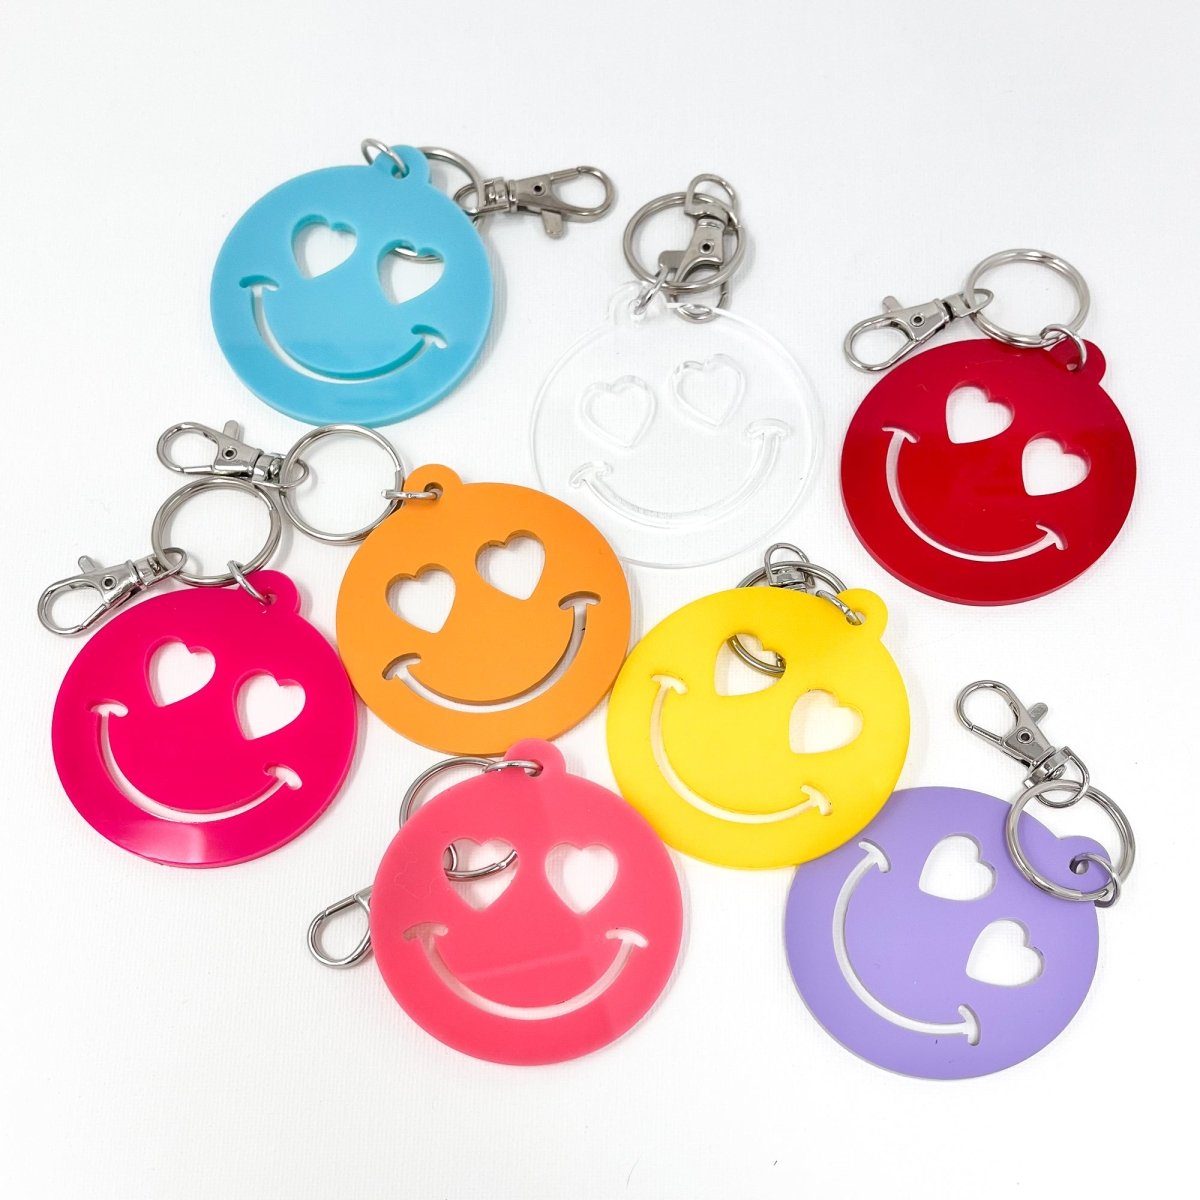 Heart Smiley Face Keychain - sonder and wolf